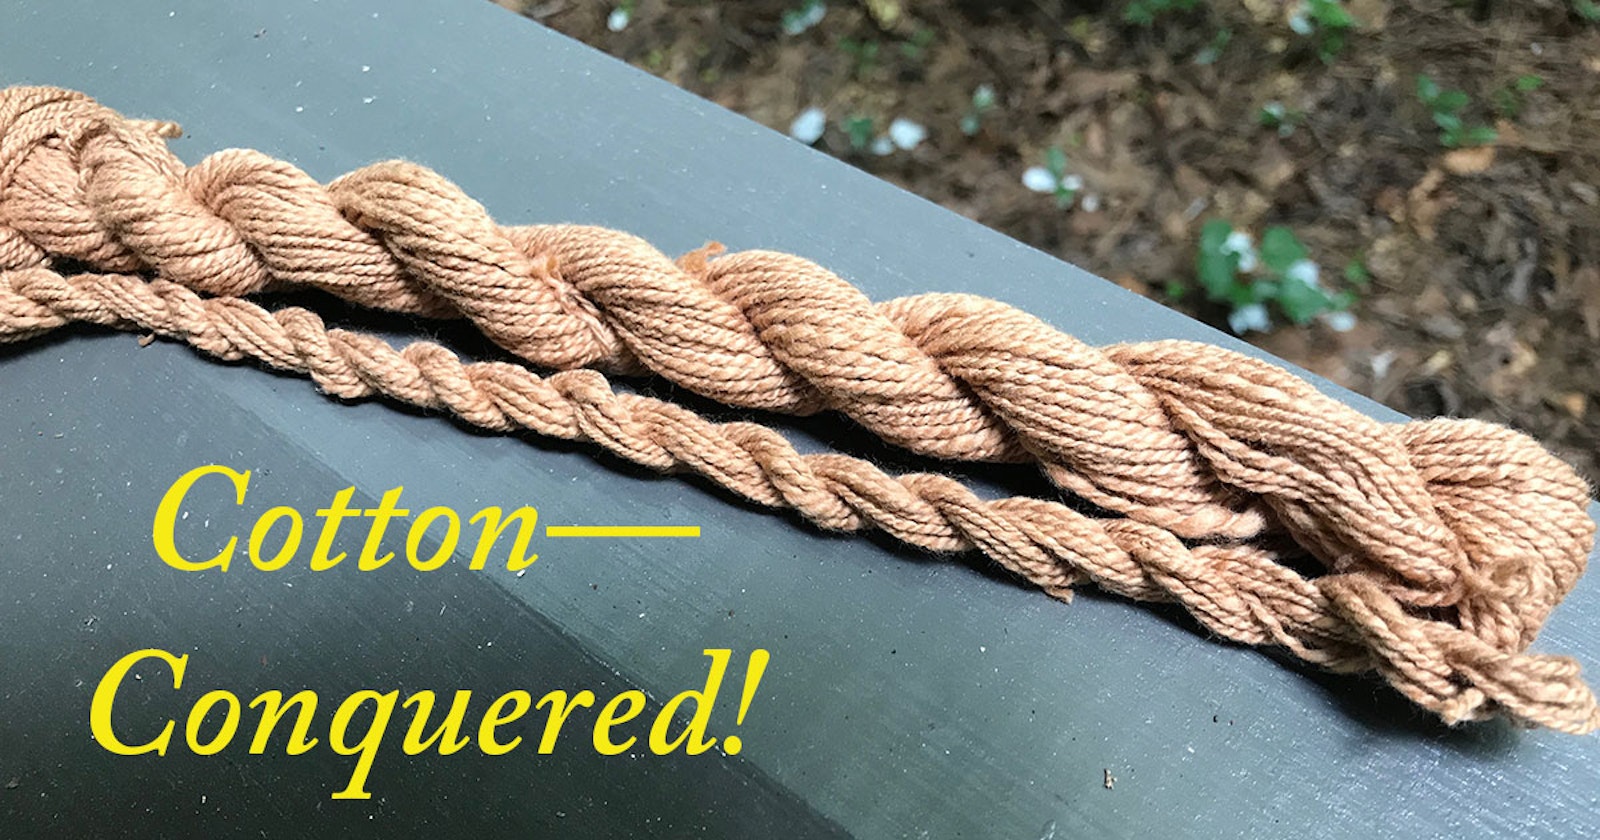 Spinning Cotton Yarn: Lessons For Completing a Personal Challenge